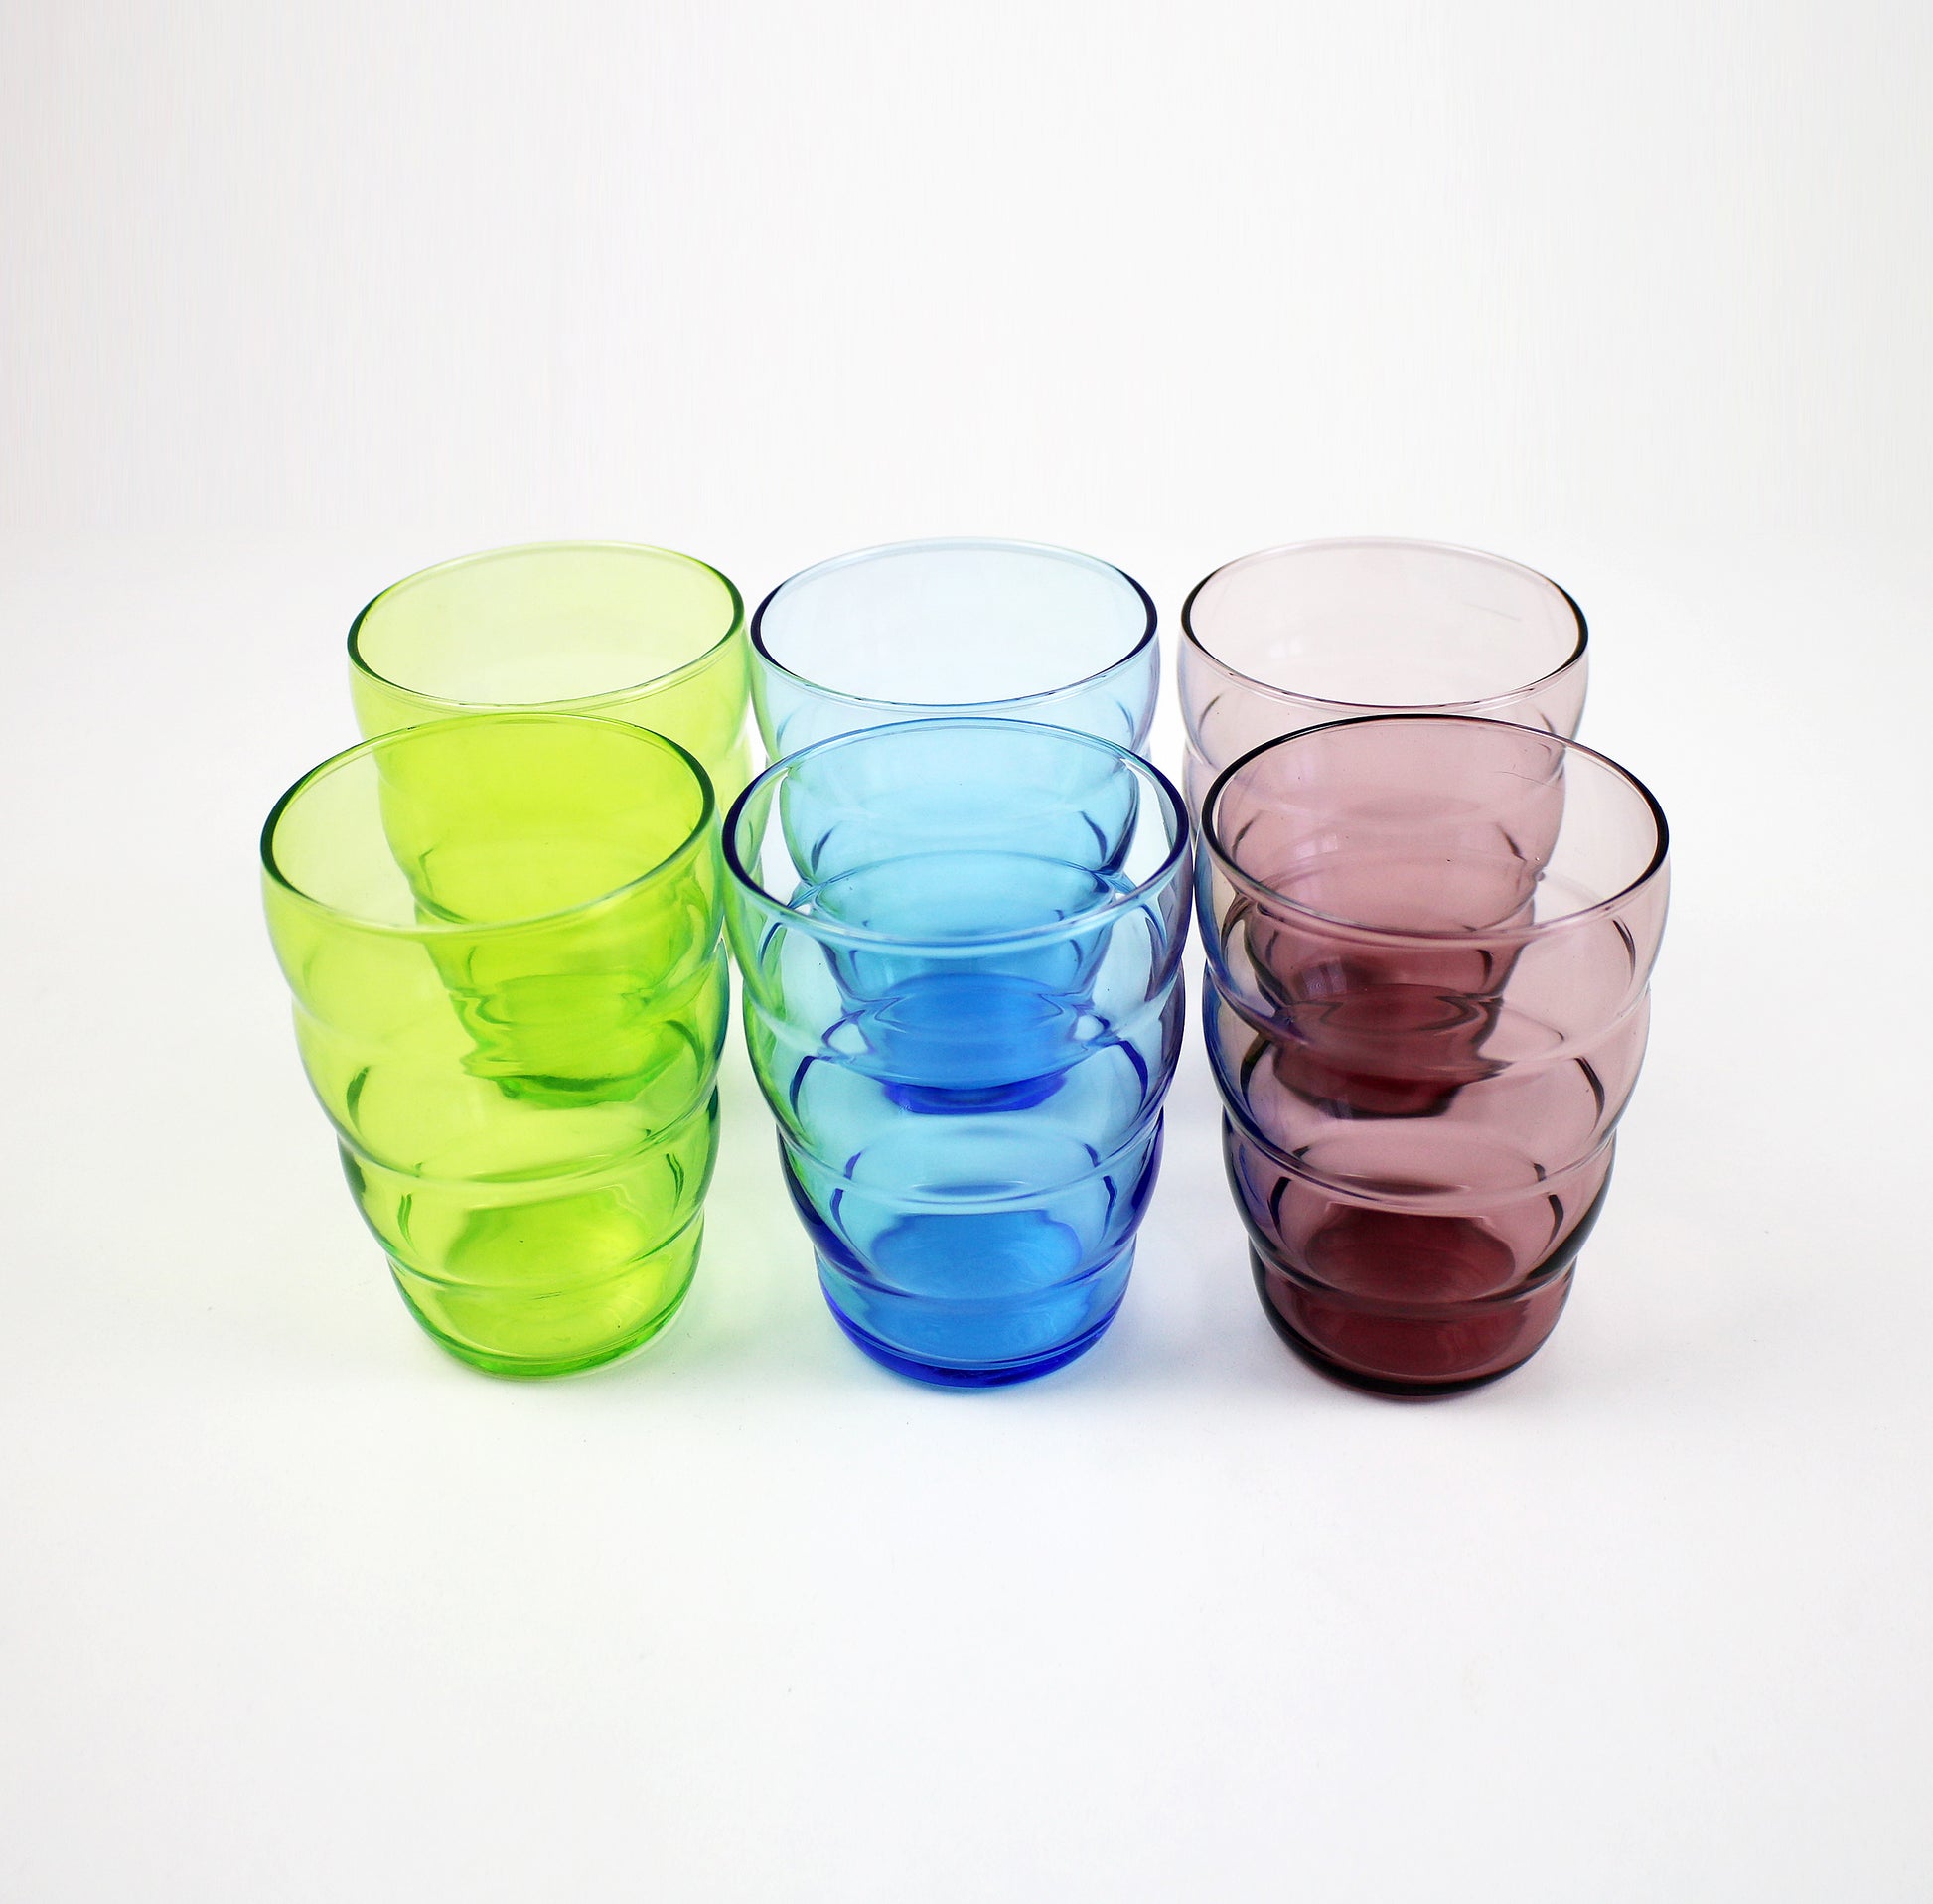 Retired and preloved Skoja beehive glasses by IKEA 2012 - sold in pairs